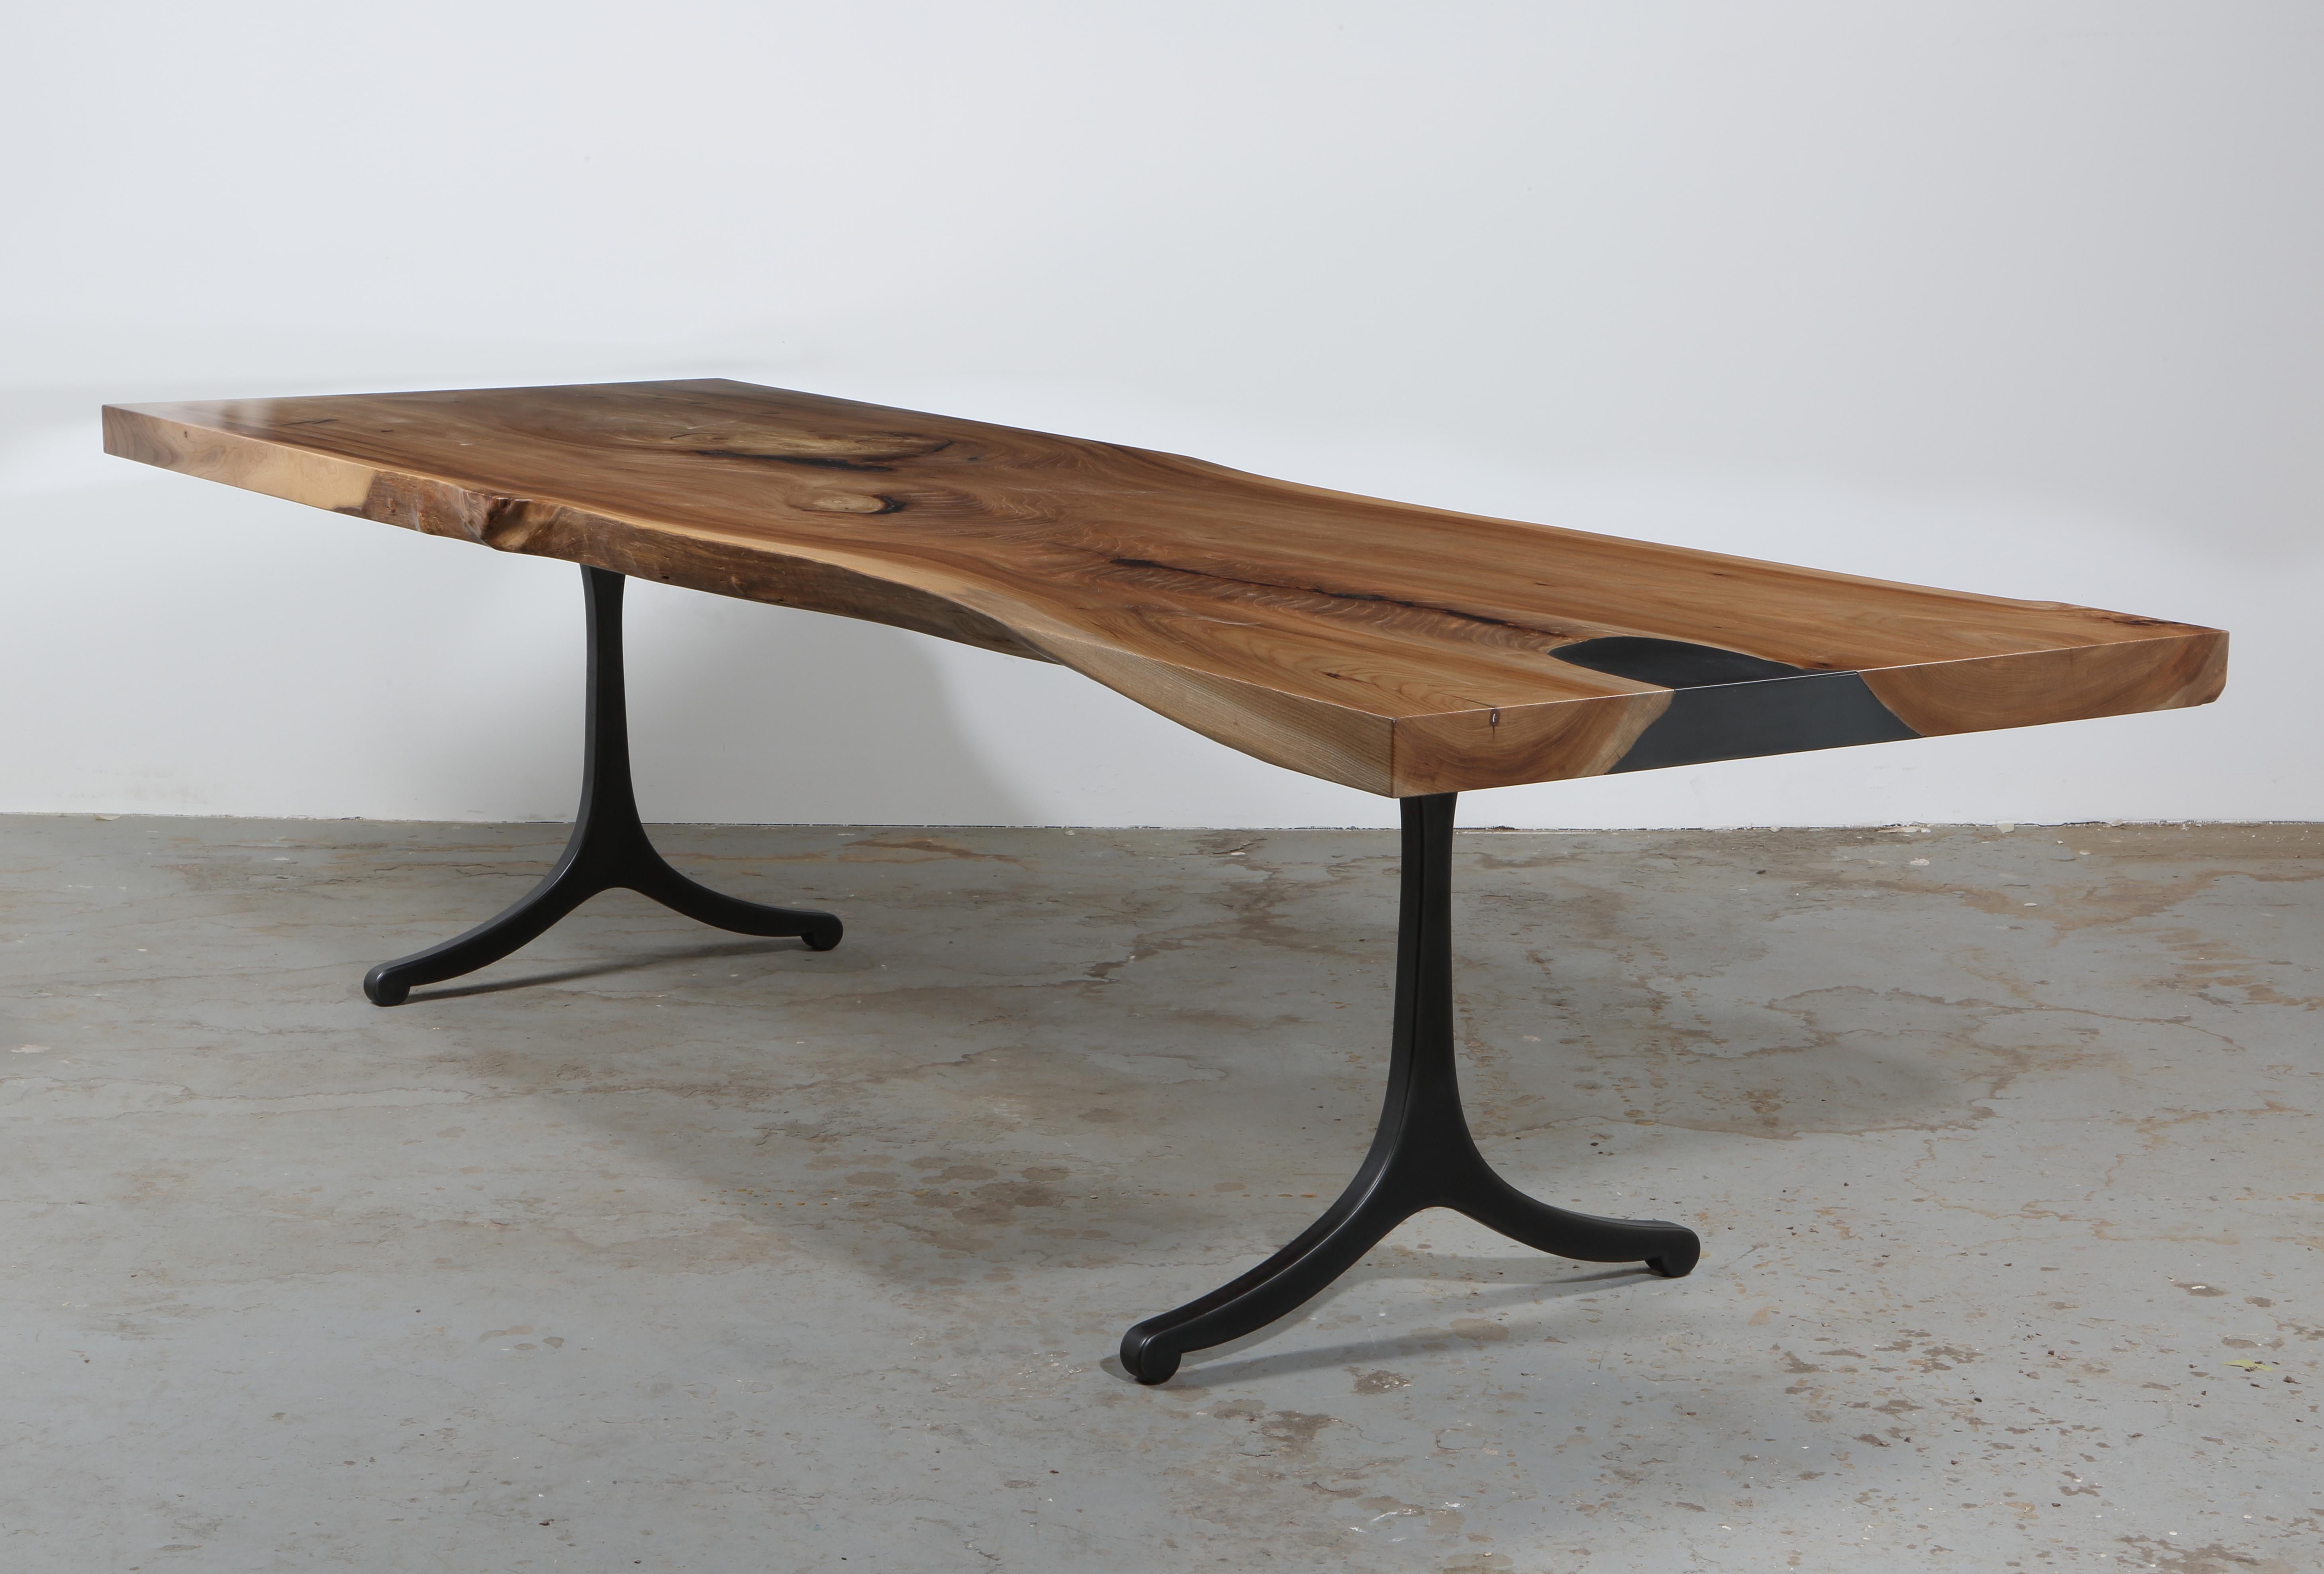 Serif Series dining table

A single slab of 3” thick elm, with just a hint of live edge left intact. Grain matched steel inlay with removable plate revealing hidden storage. Signature Serif Leg in flame cut/blackened finish. Please note that each